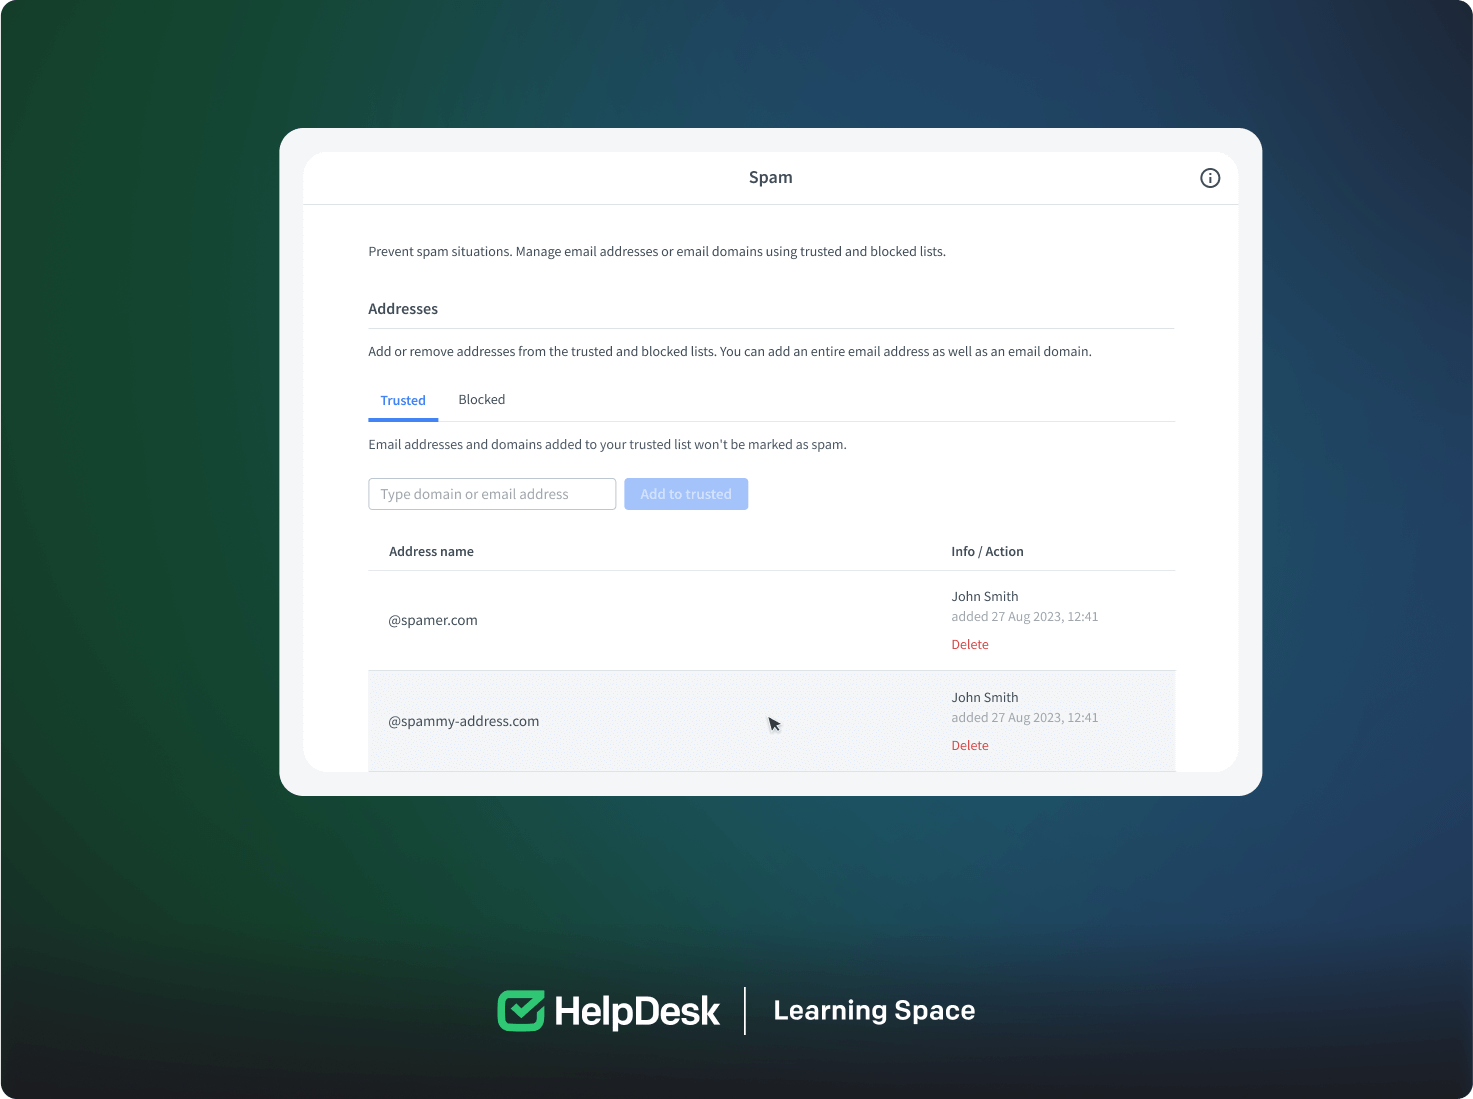 Spam details in the HelpDesk App